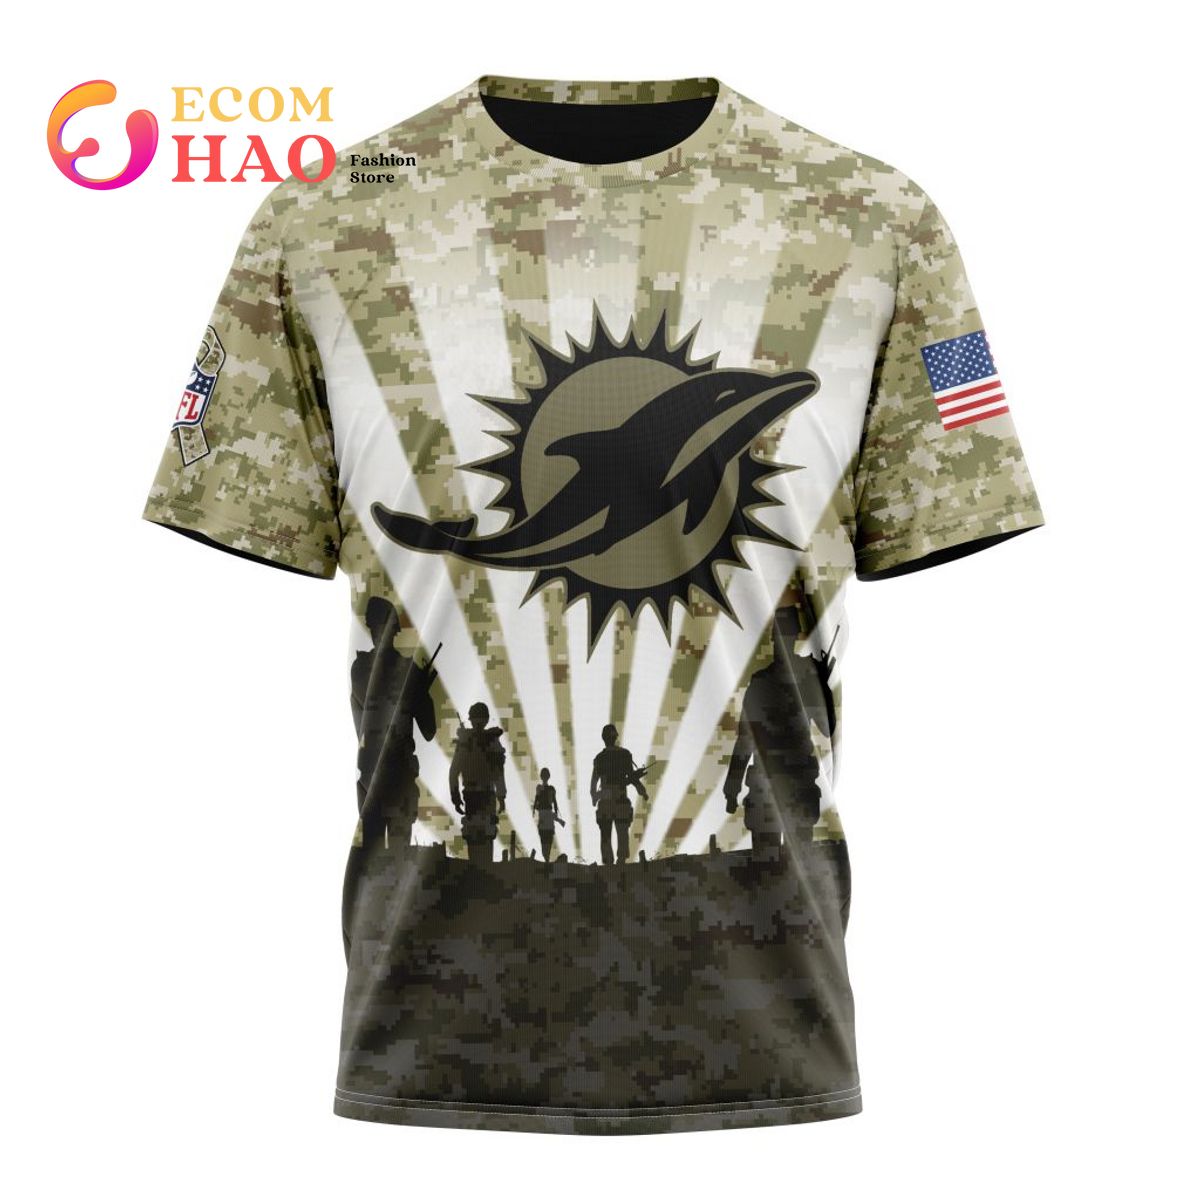 Miami Dolphins Shop - NFL Miami Dolphins Salute To Service Honor Veterans And Their Families T Shirt